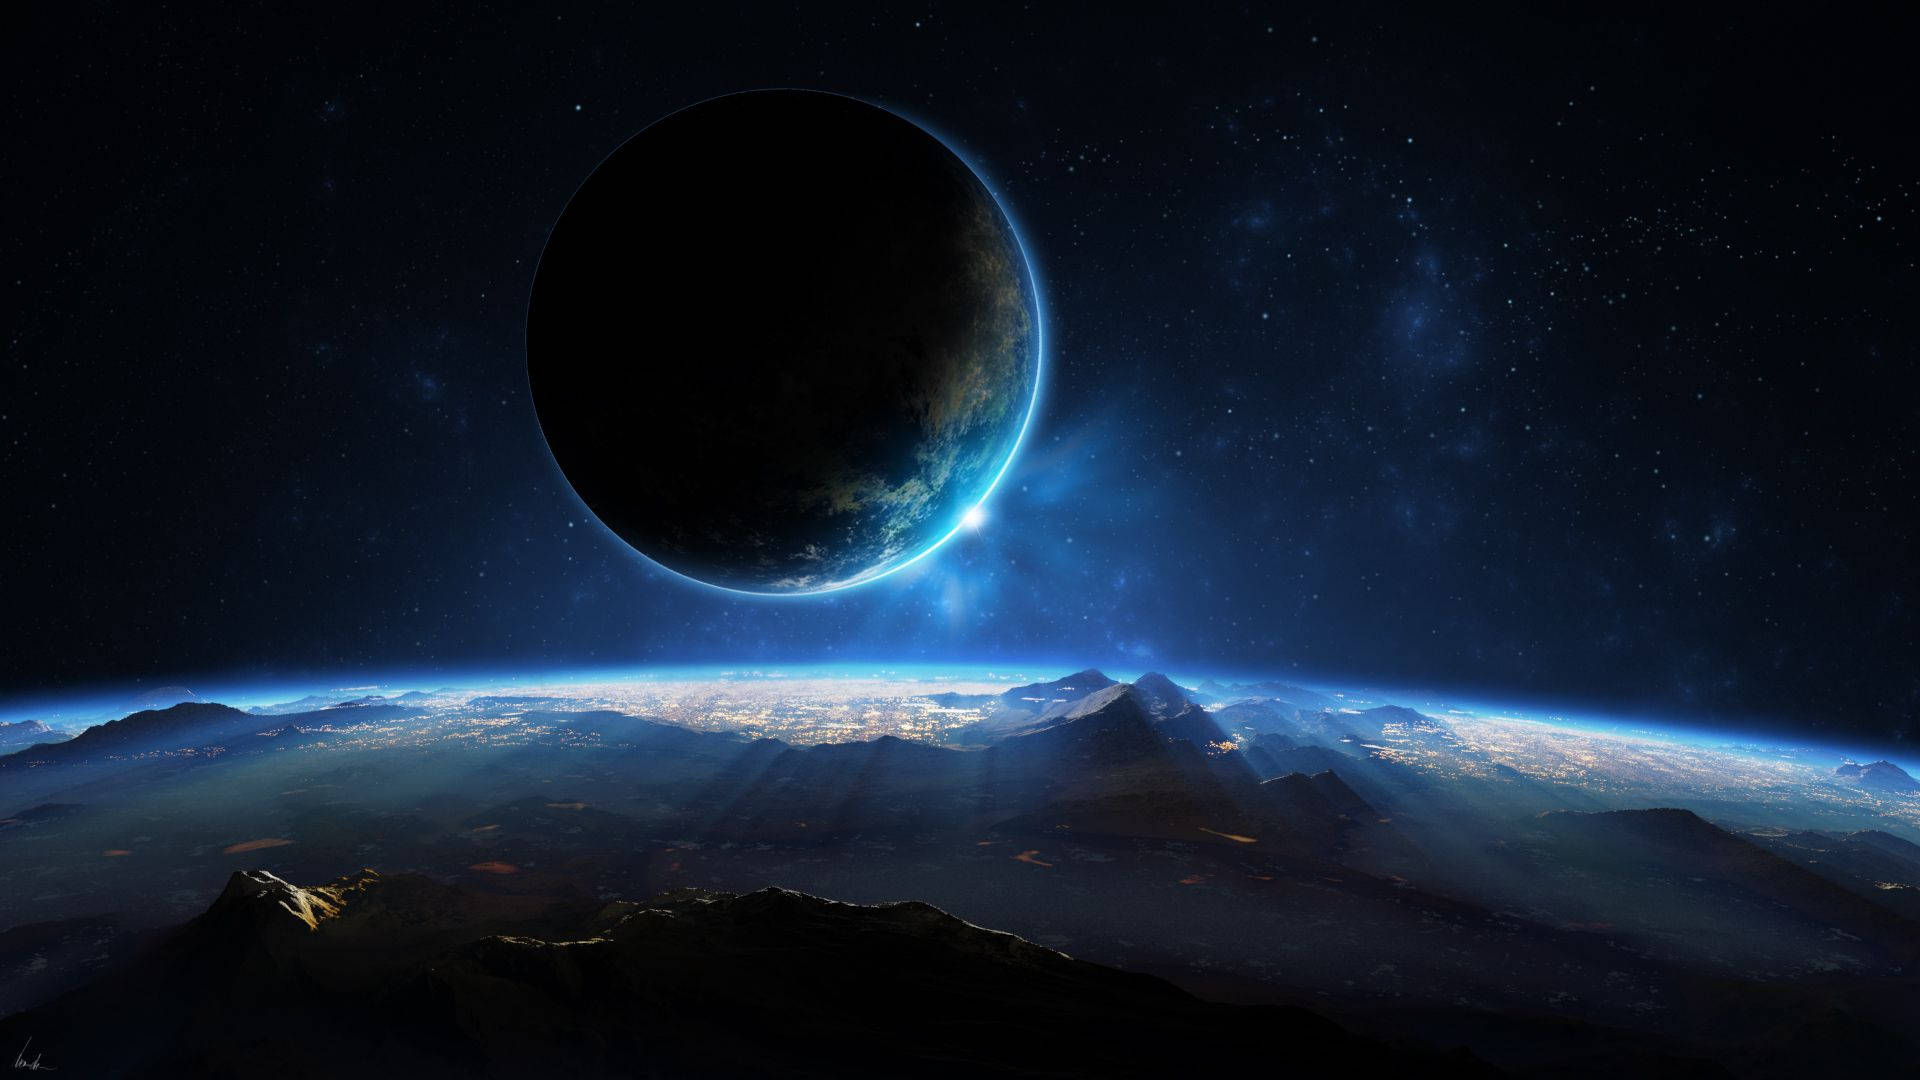 Earth, Moon and Astronaut at night. Wallpaper